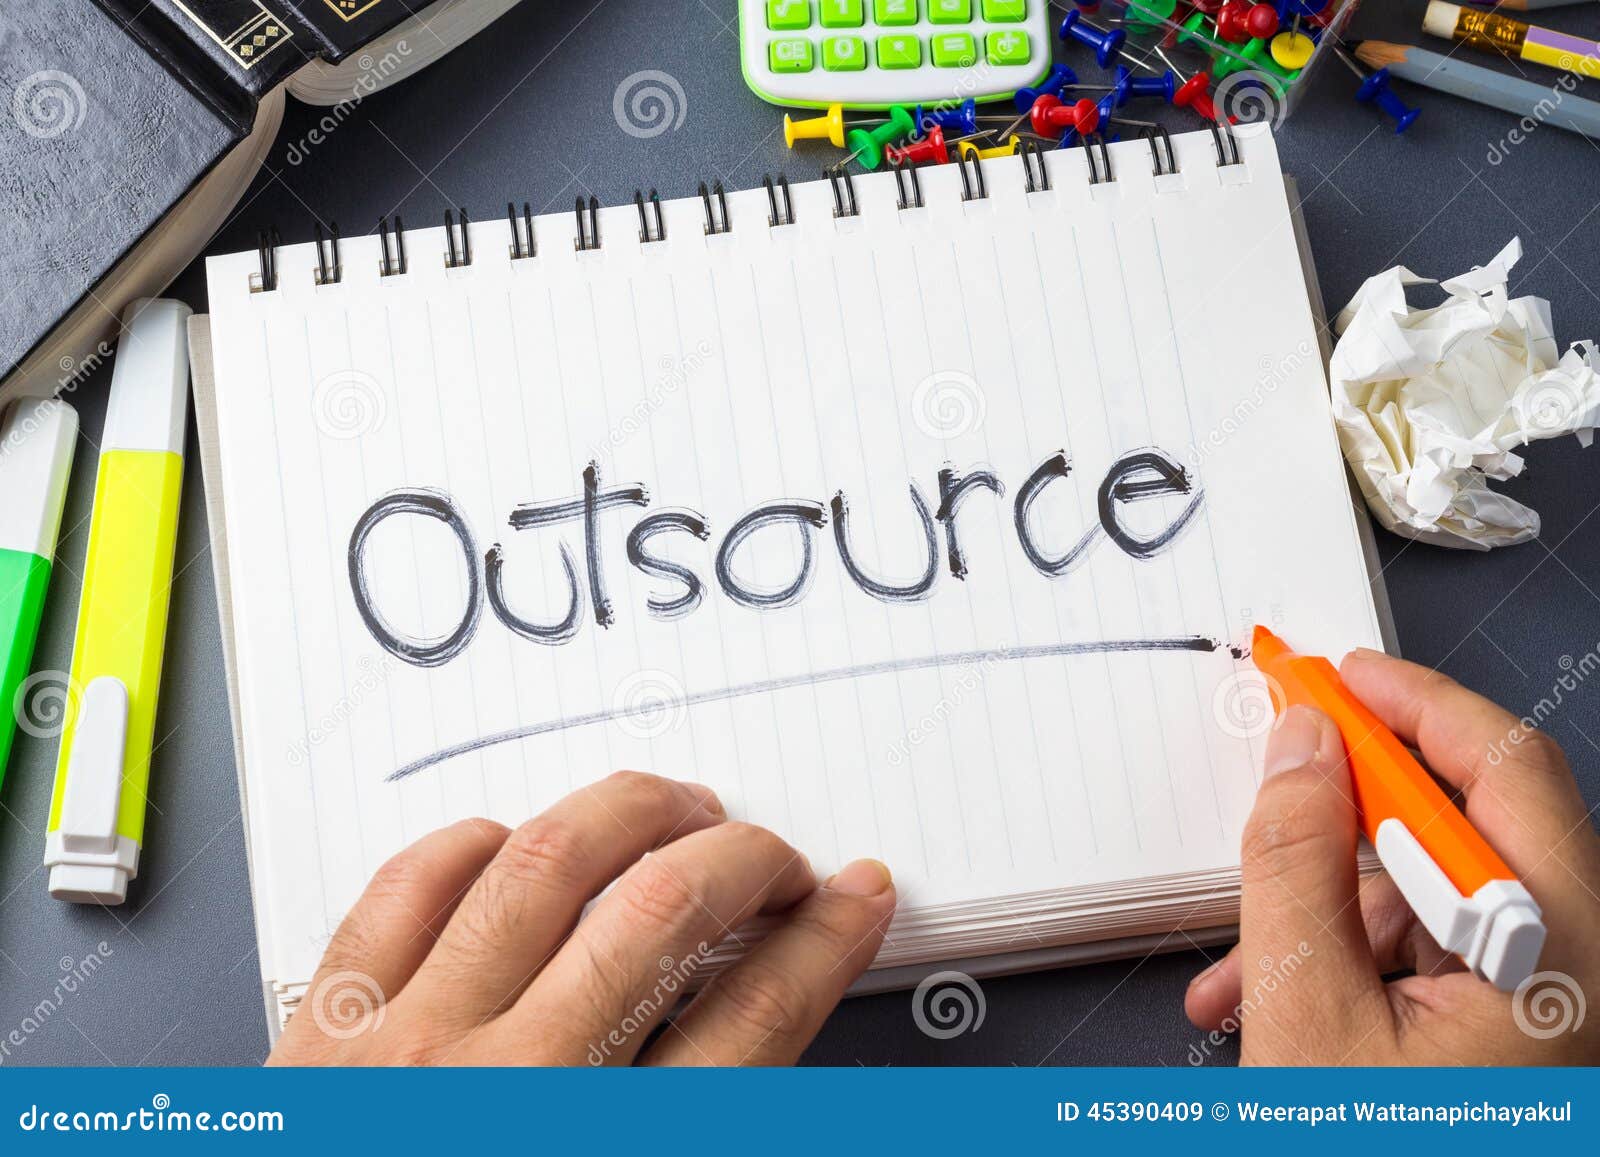 outsource